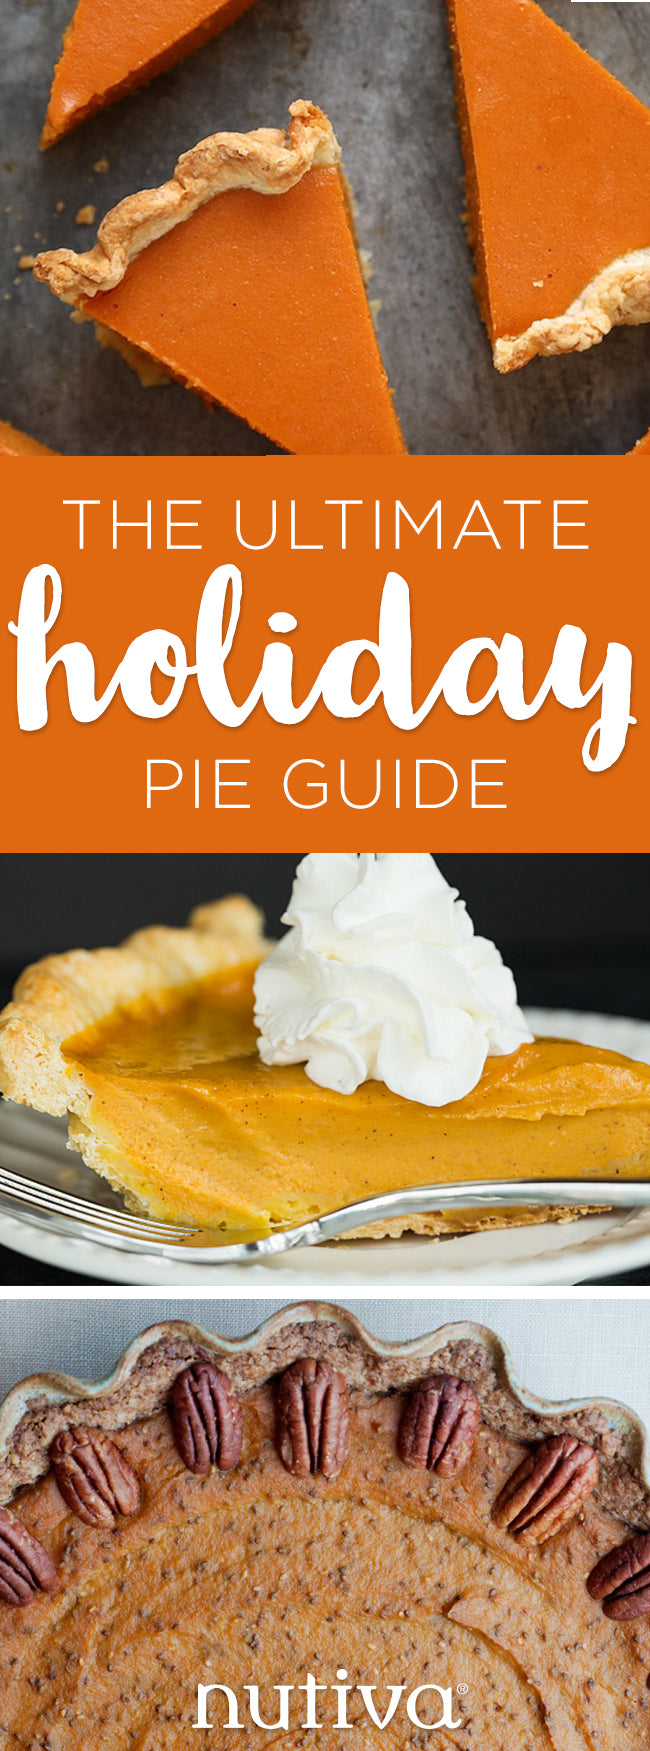 Take your holiday baking to the next level with VGCC's Pie Basics